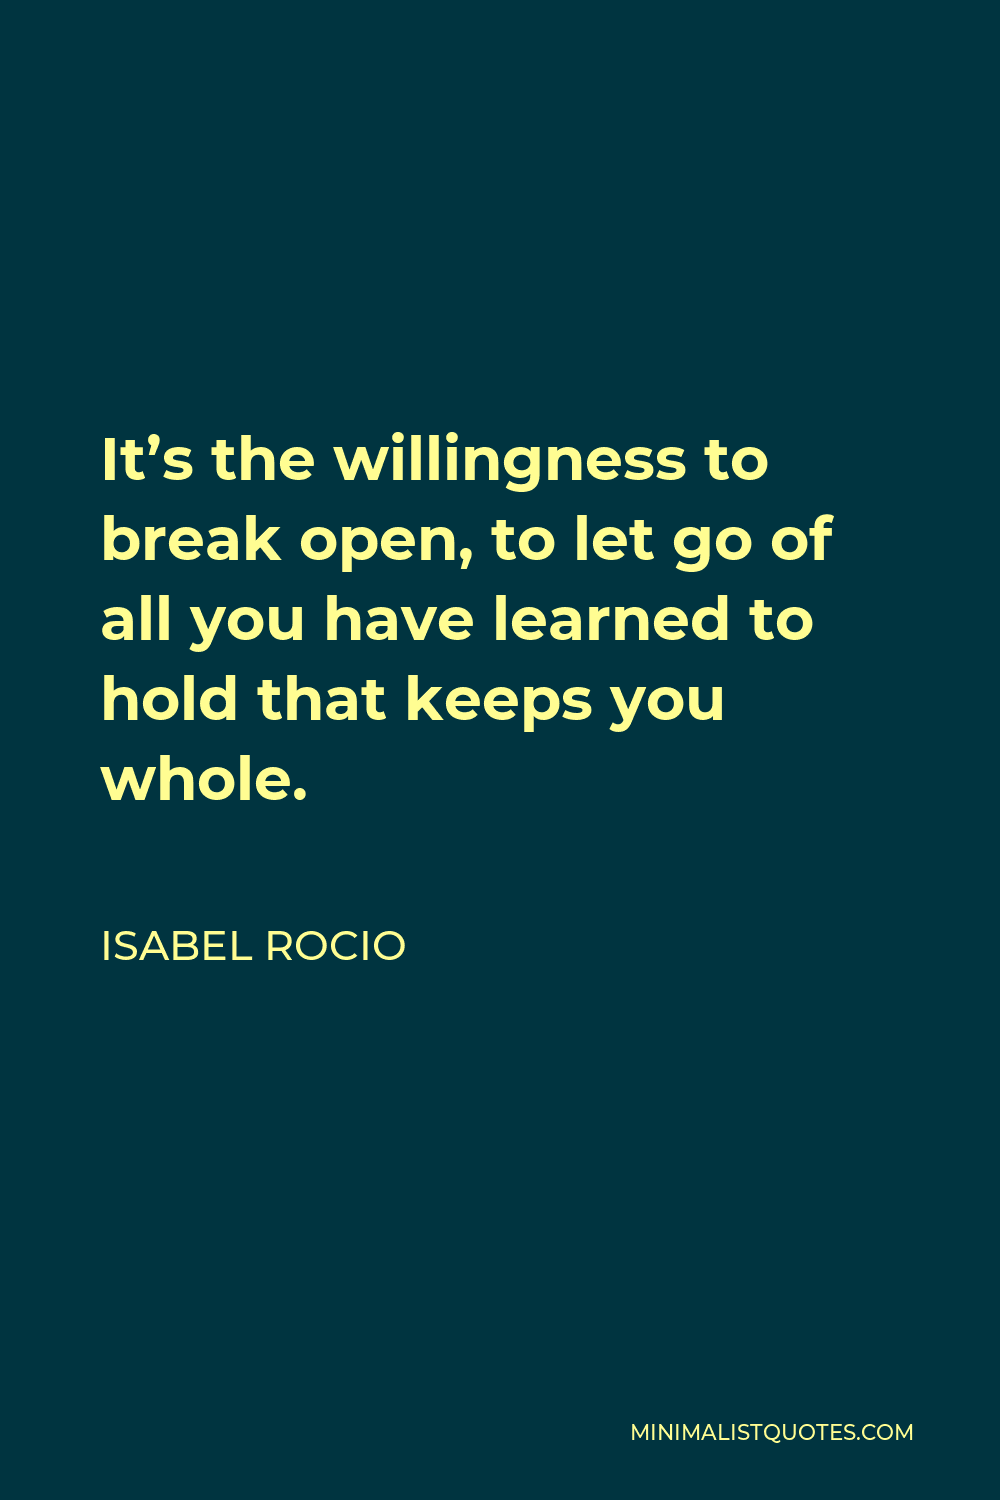 Isabel Rocio Quote - It’s the willingness to break open, to let go of all you have learned to hold that keeps you whole.